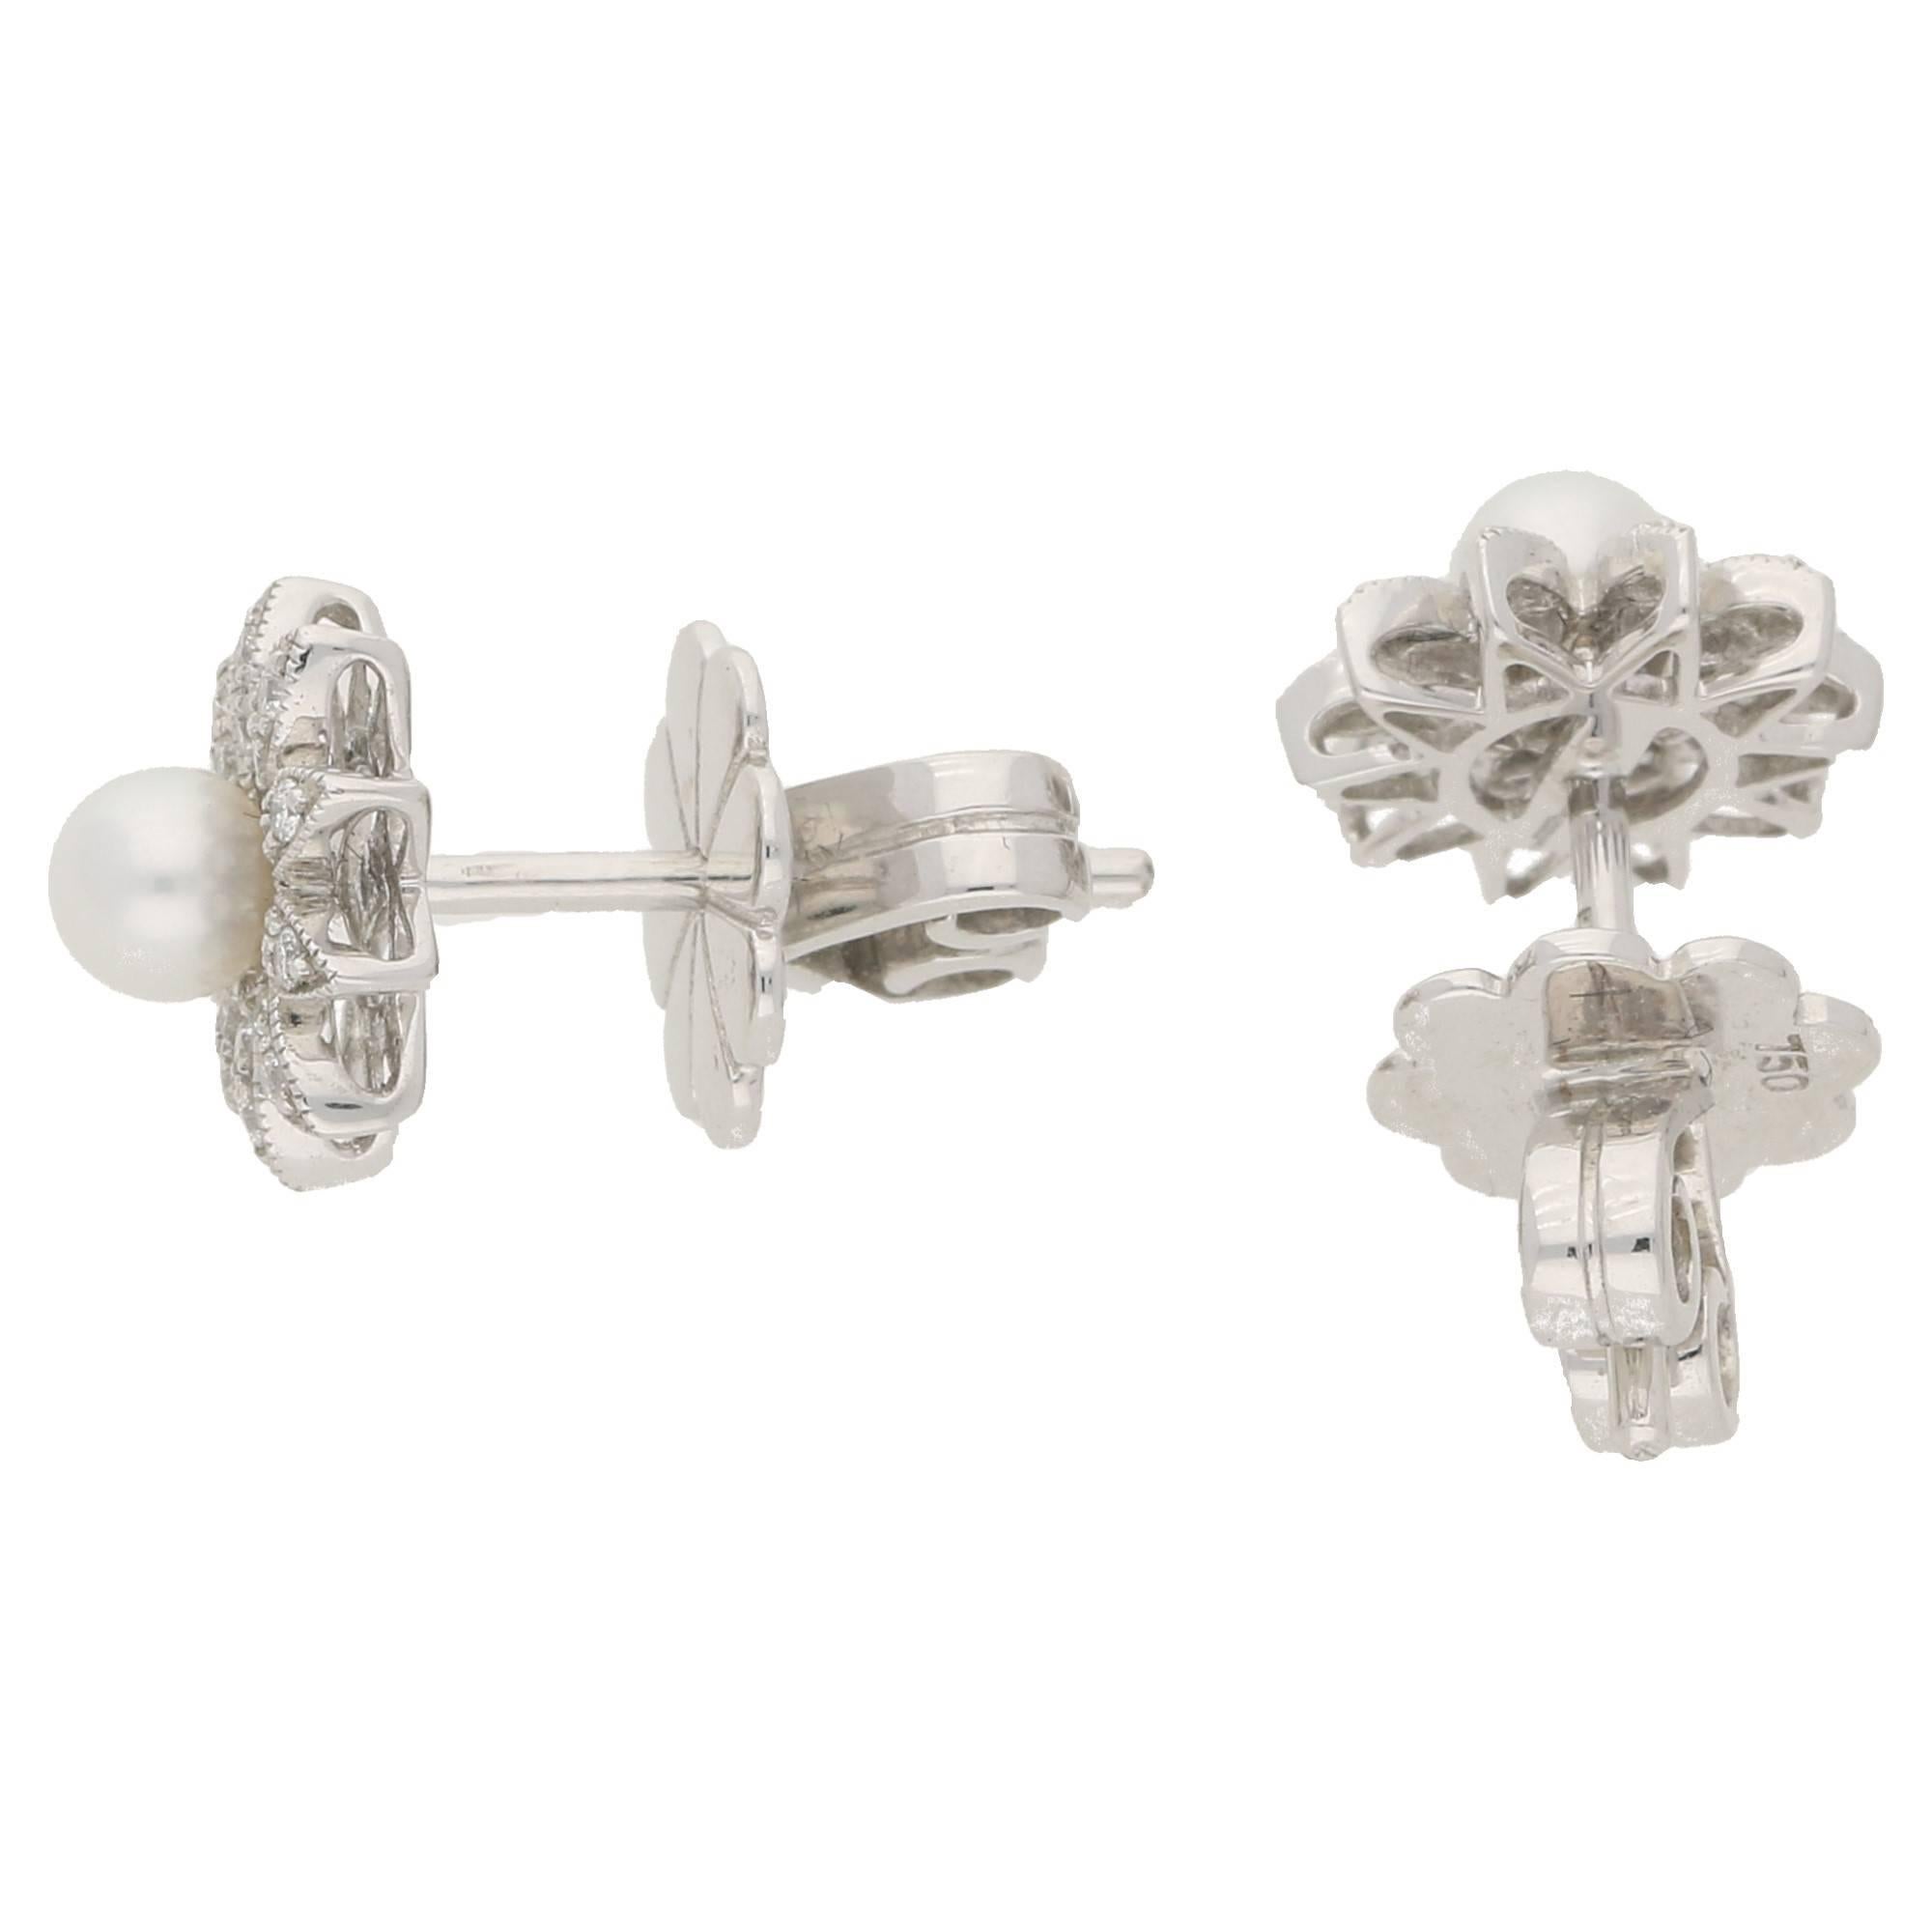 A very sweet pair of pearl and diamond floral design stud earrings. The diamonds are delicately set in a mille grain edged setting. At the centres are gorgeous white freshwater pearls. These are on secure post and butterfly fittings, in hallmarked